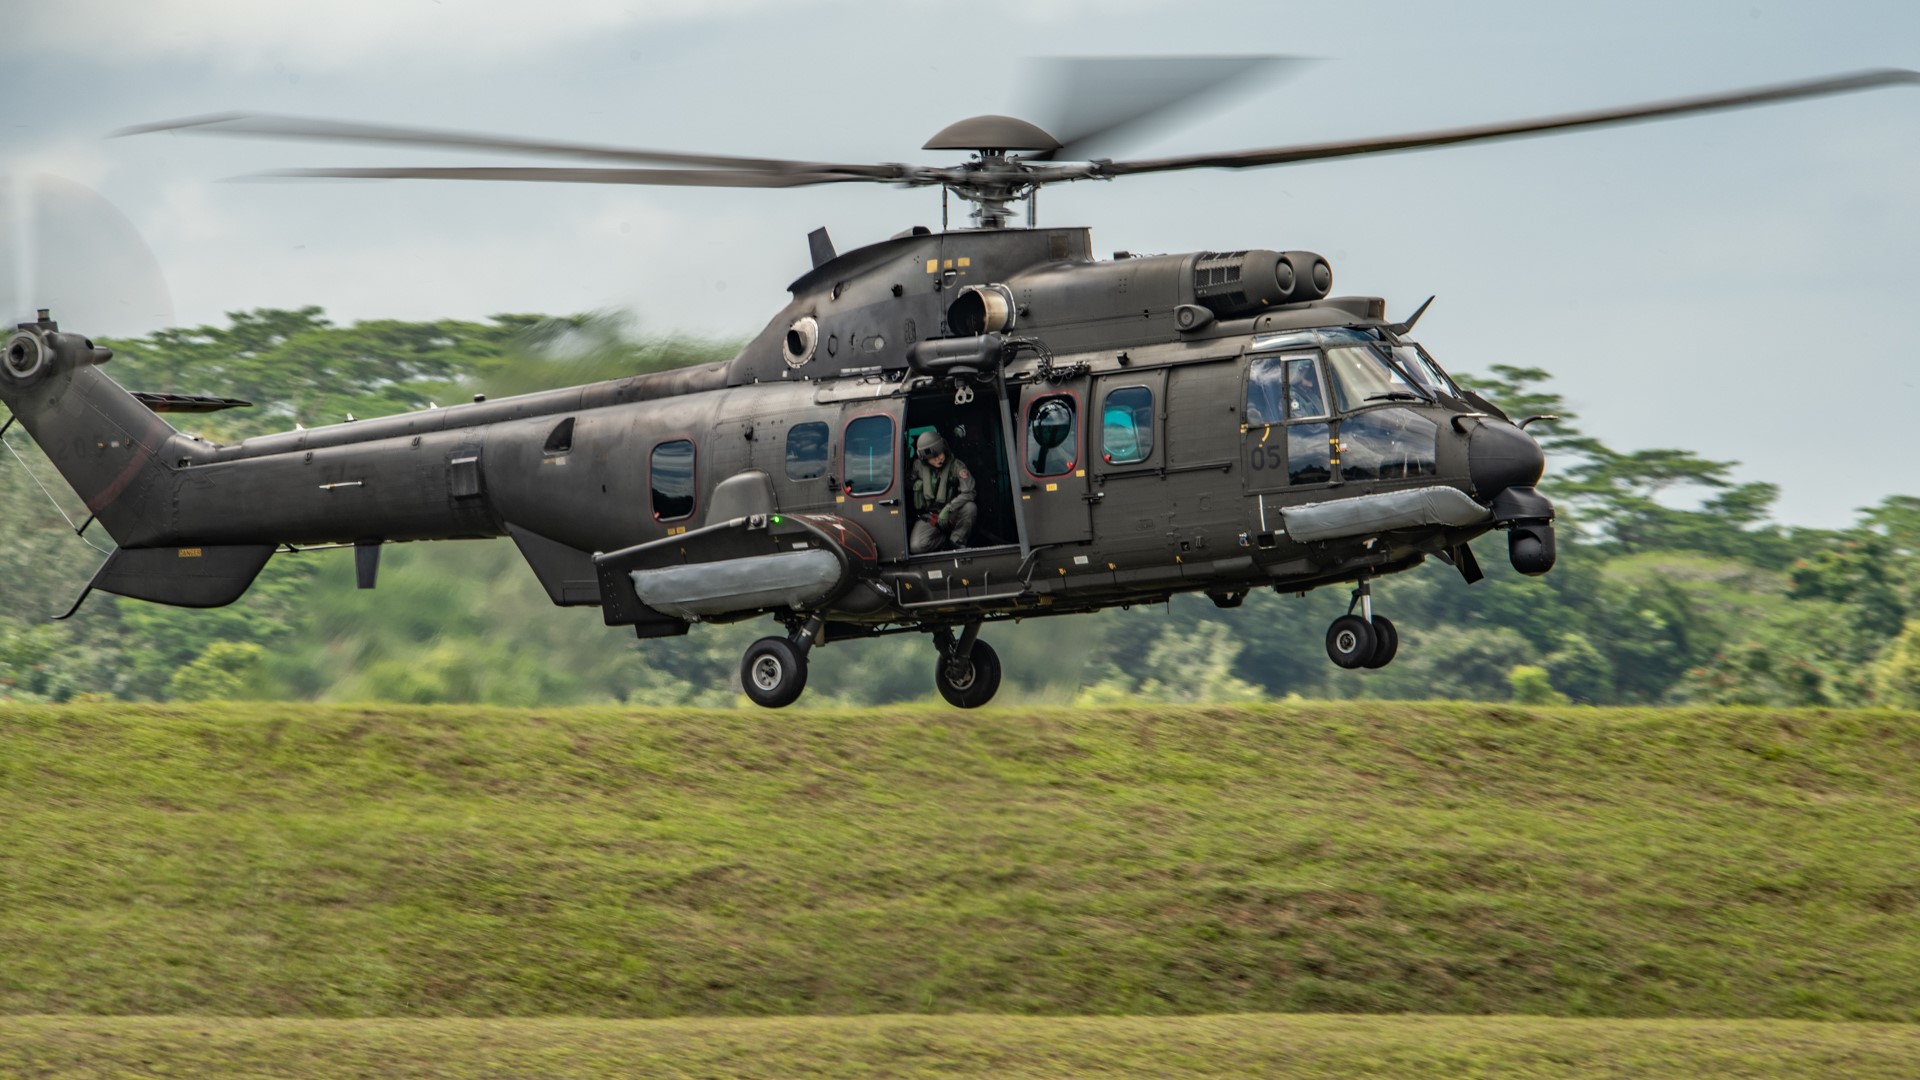 New helicopters & robust air defence capabilities strengthen RSAF's edge